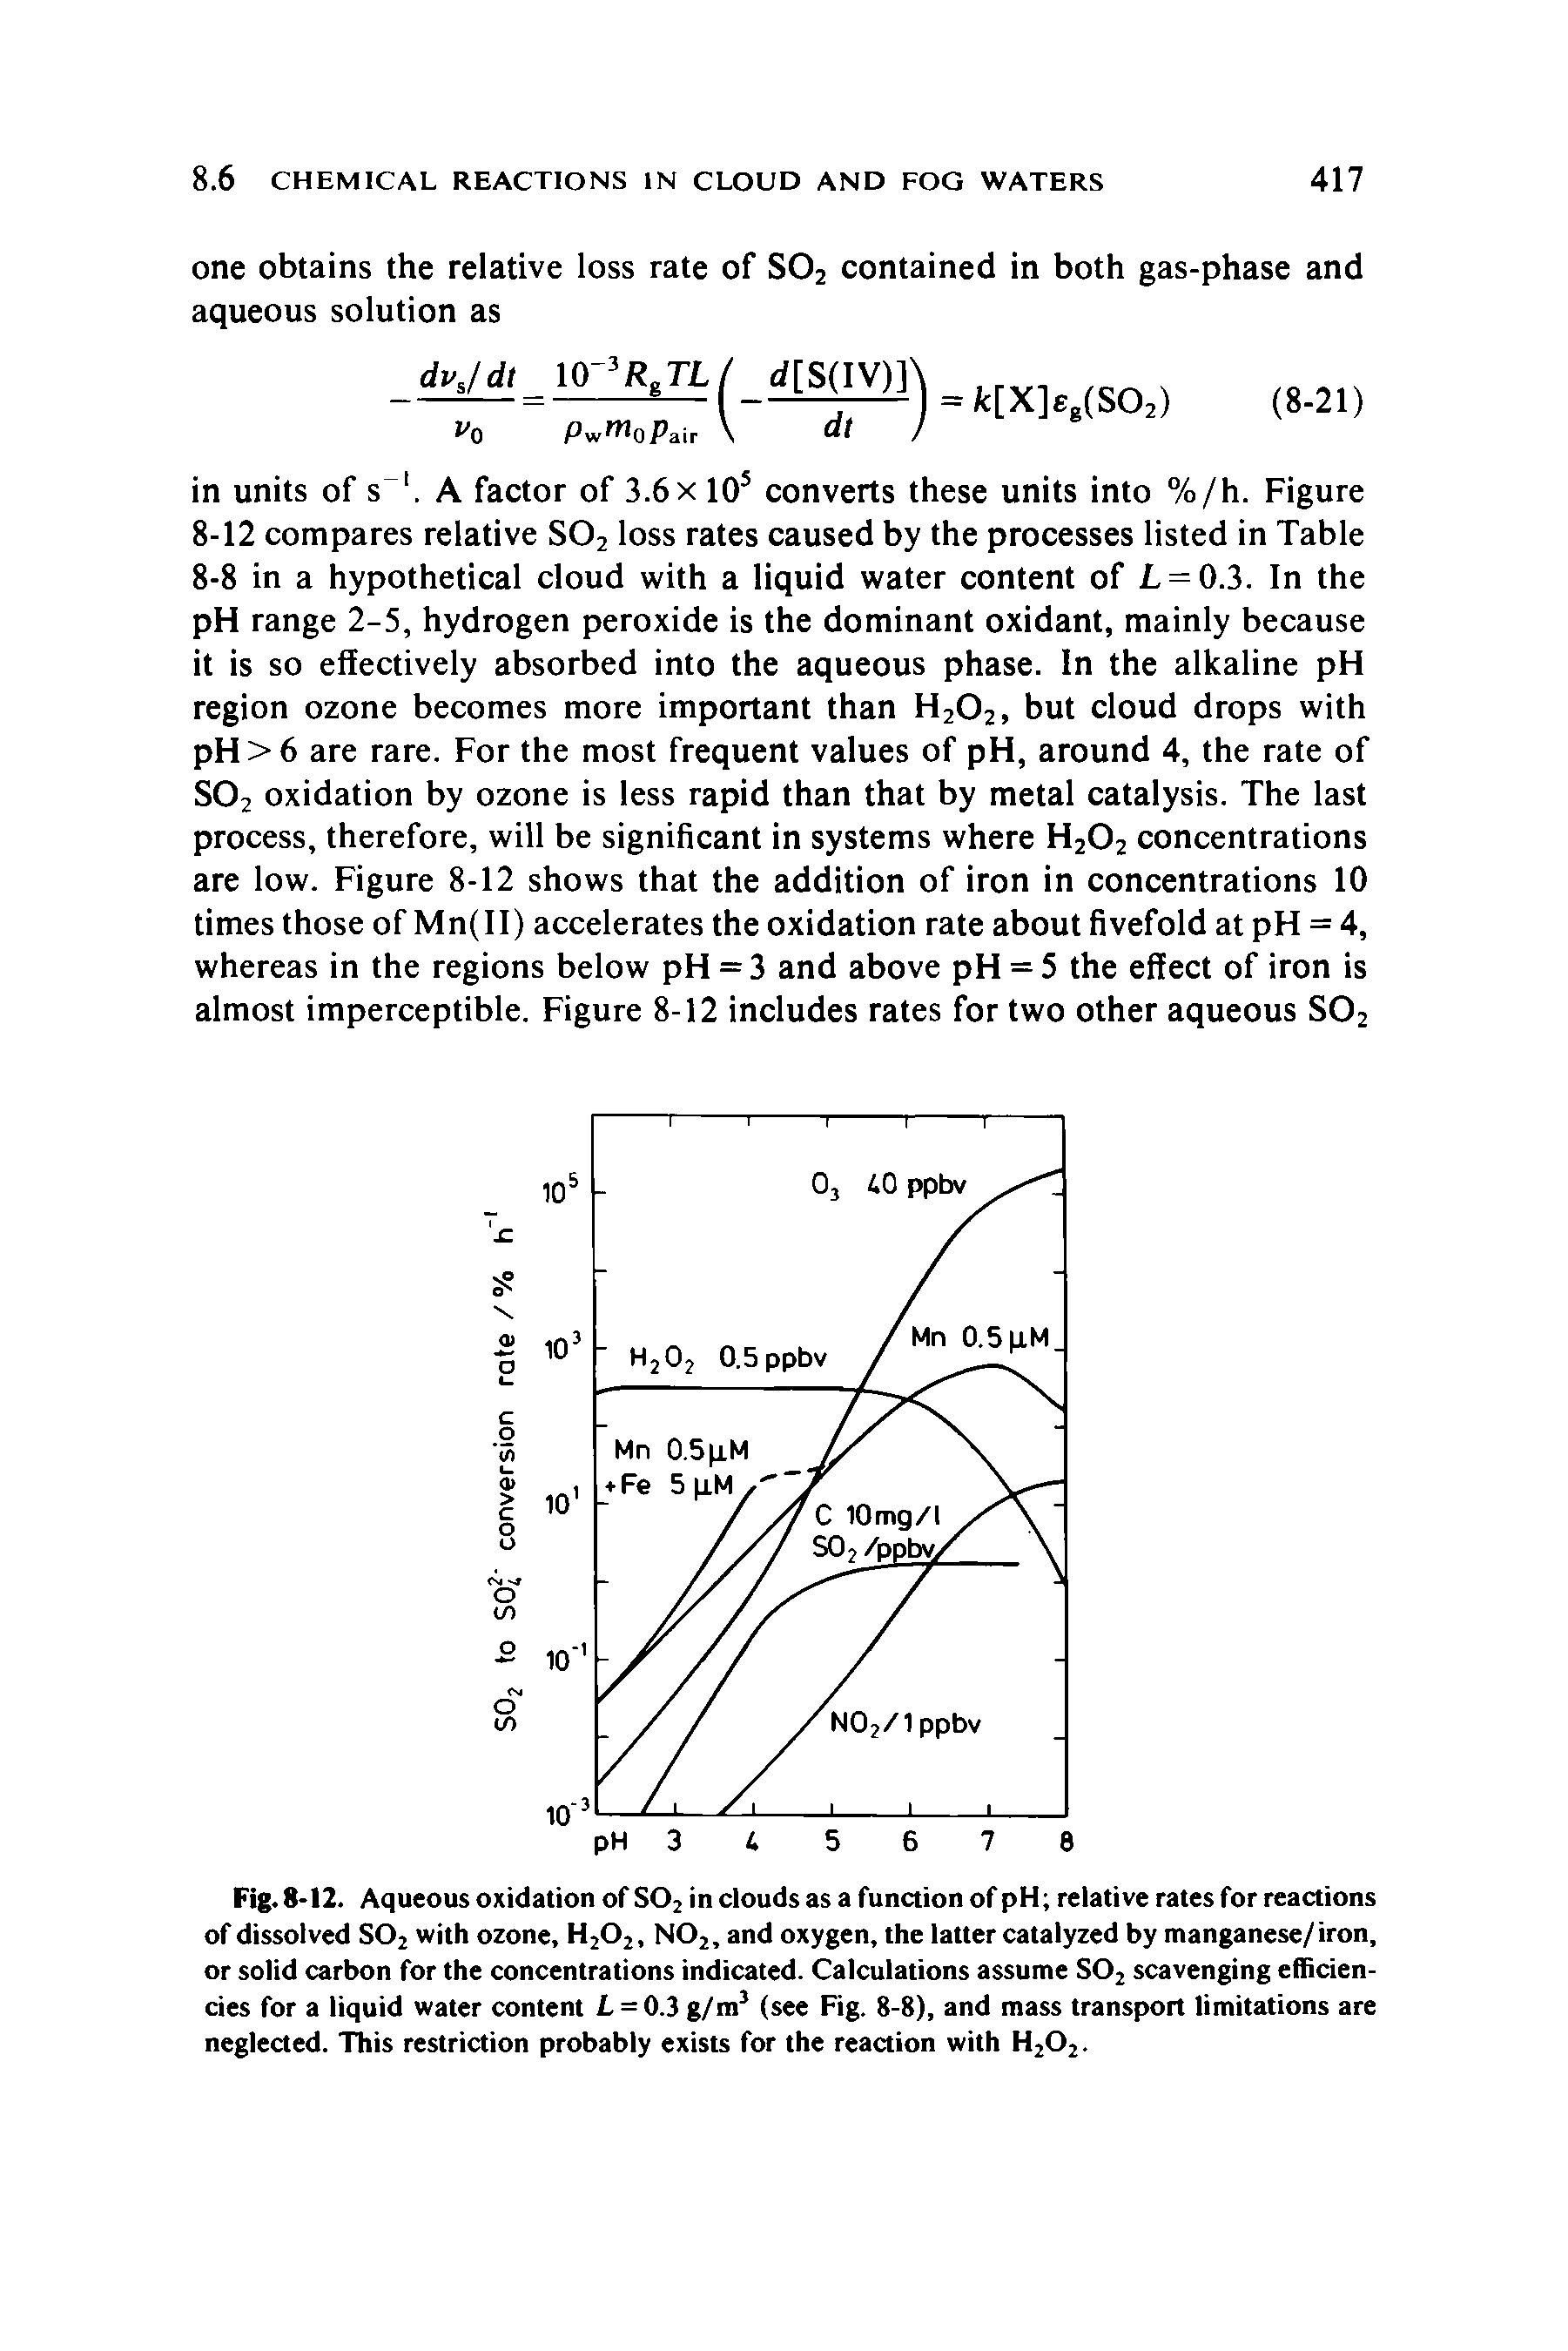 Fig. 8-12. Aqueous oxidation of S02 in clouds as a function of pH relative rates for reactions of dissolved S02 with ozone, H202, NOz, and oxygen, the latter catalyzed by manganese/iron, or solid carbon for the concentrations indicated. Calculations assume S02 scavenging efficiencies for a liquid water content L = 0.3 g/m3 (see Fig. 8-8), and mass transport limitations are neglected. This restriction probably exists for the reaction with H202.